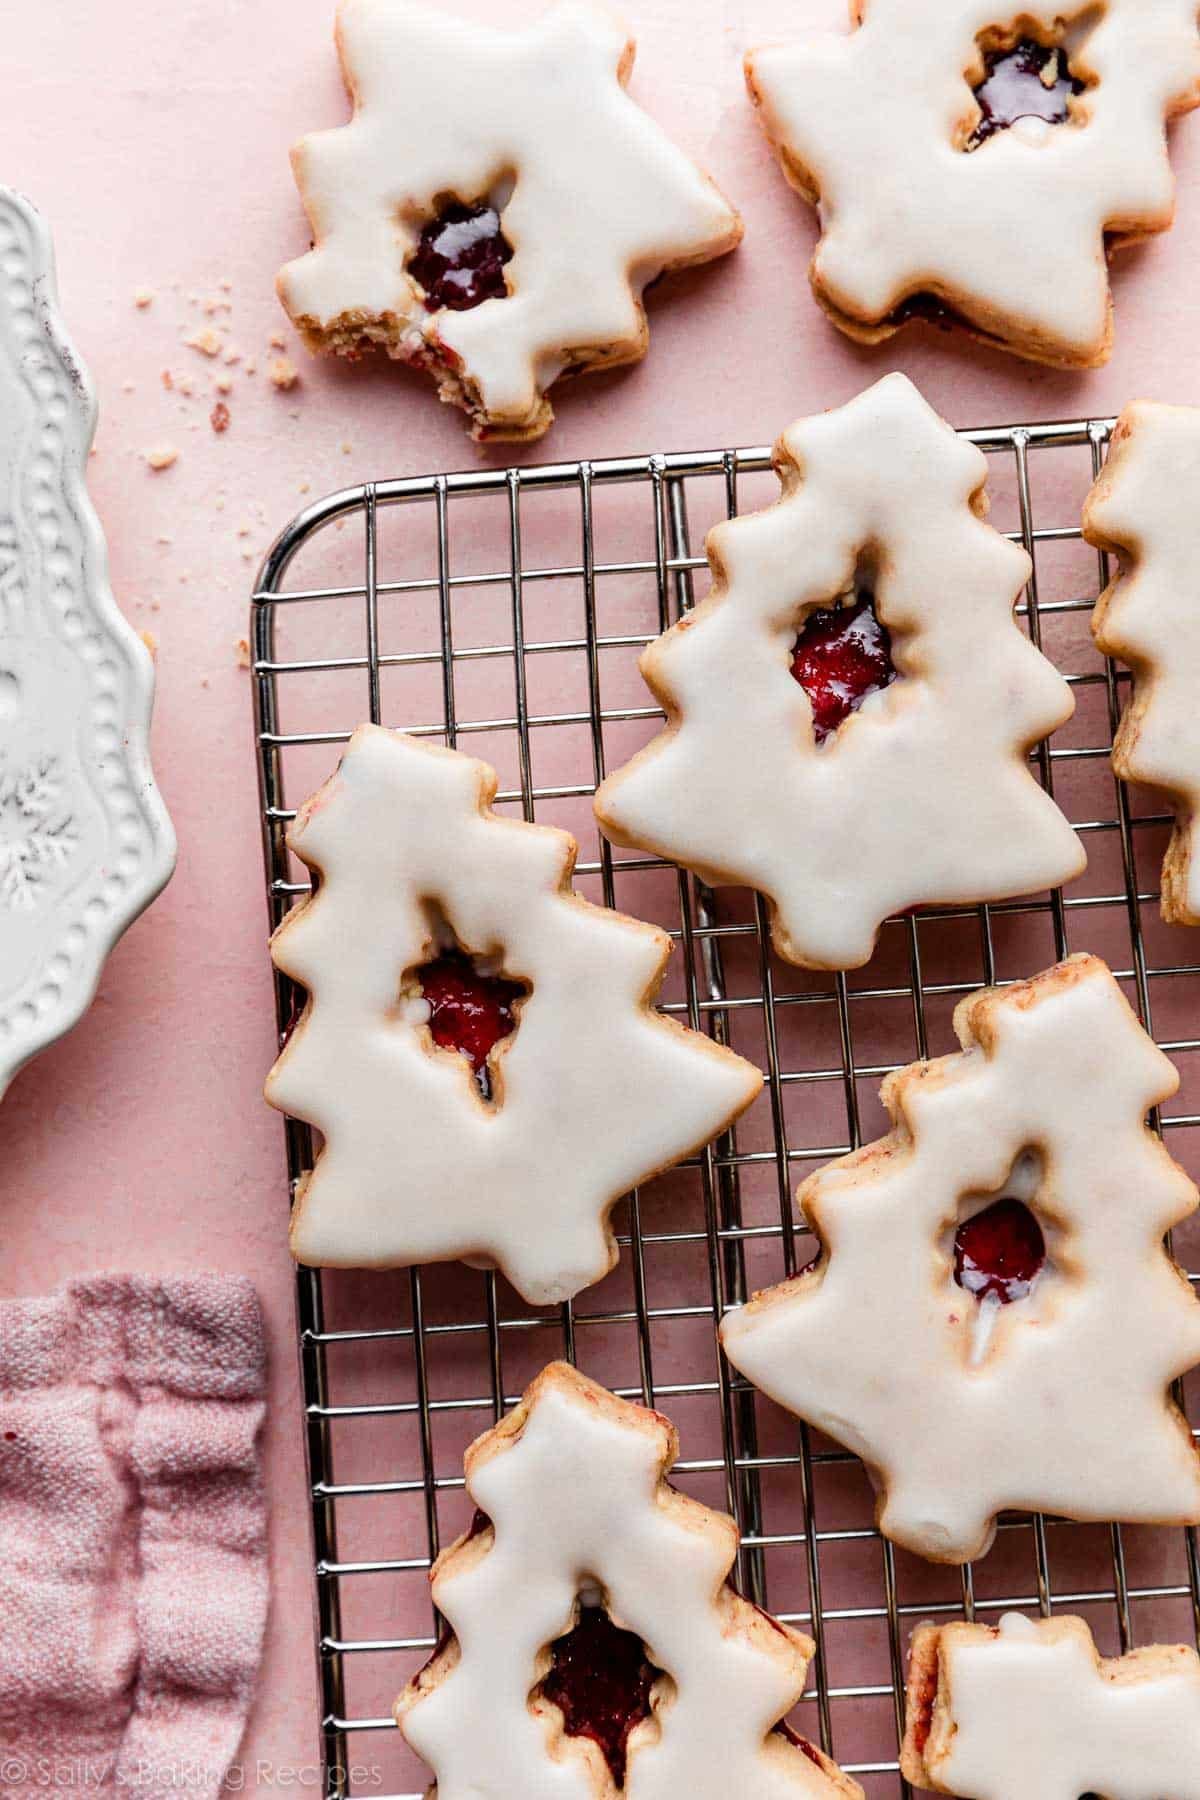 Christmas-tree shaped cherry almond linzer cookies with icing on cooling rack.